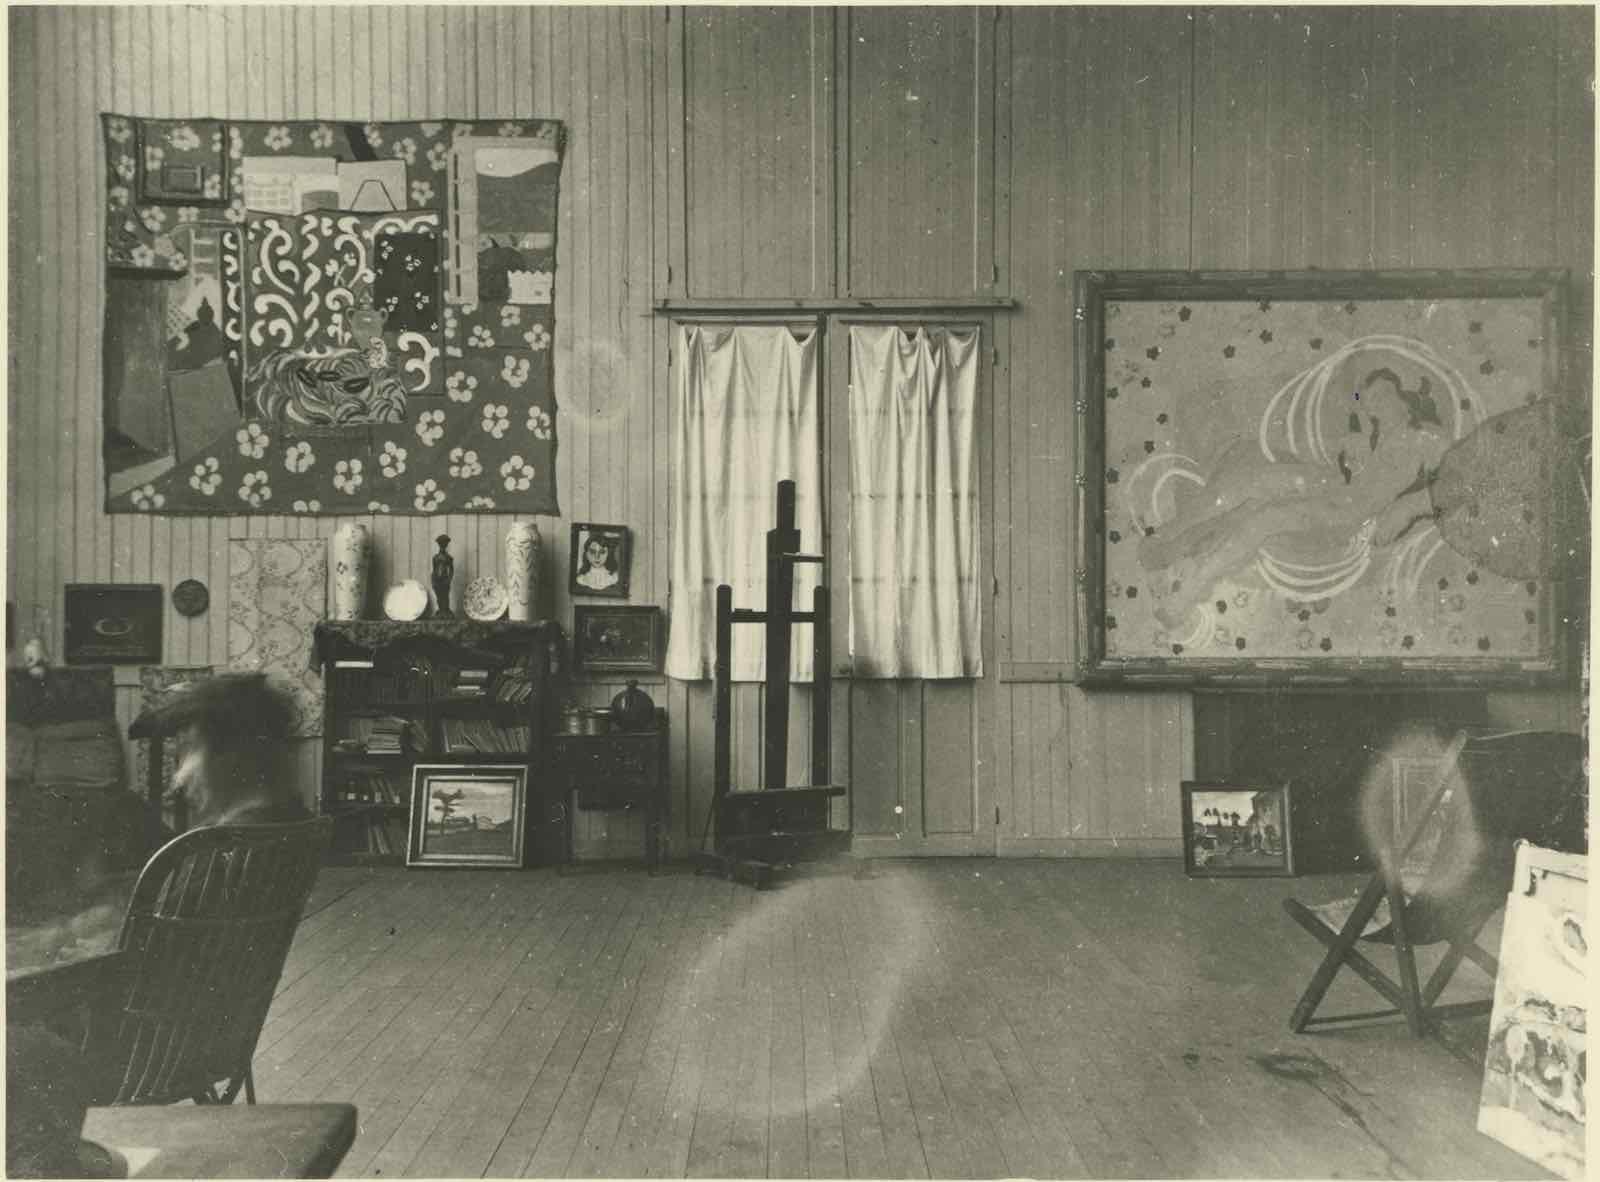 Photograph of the interior of Matisse’s studio in Issy-les-Moulineaux. October/November 1911.